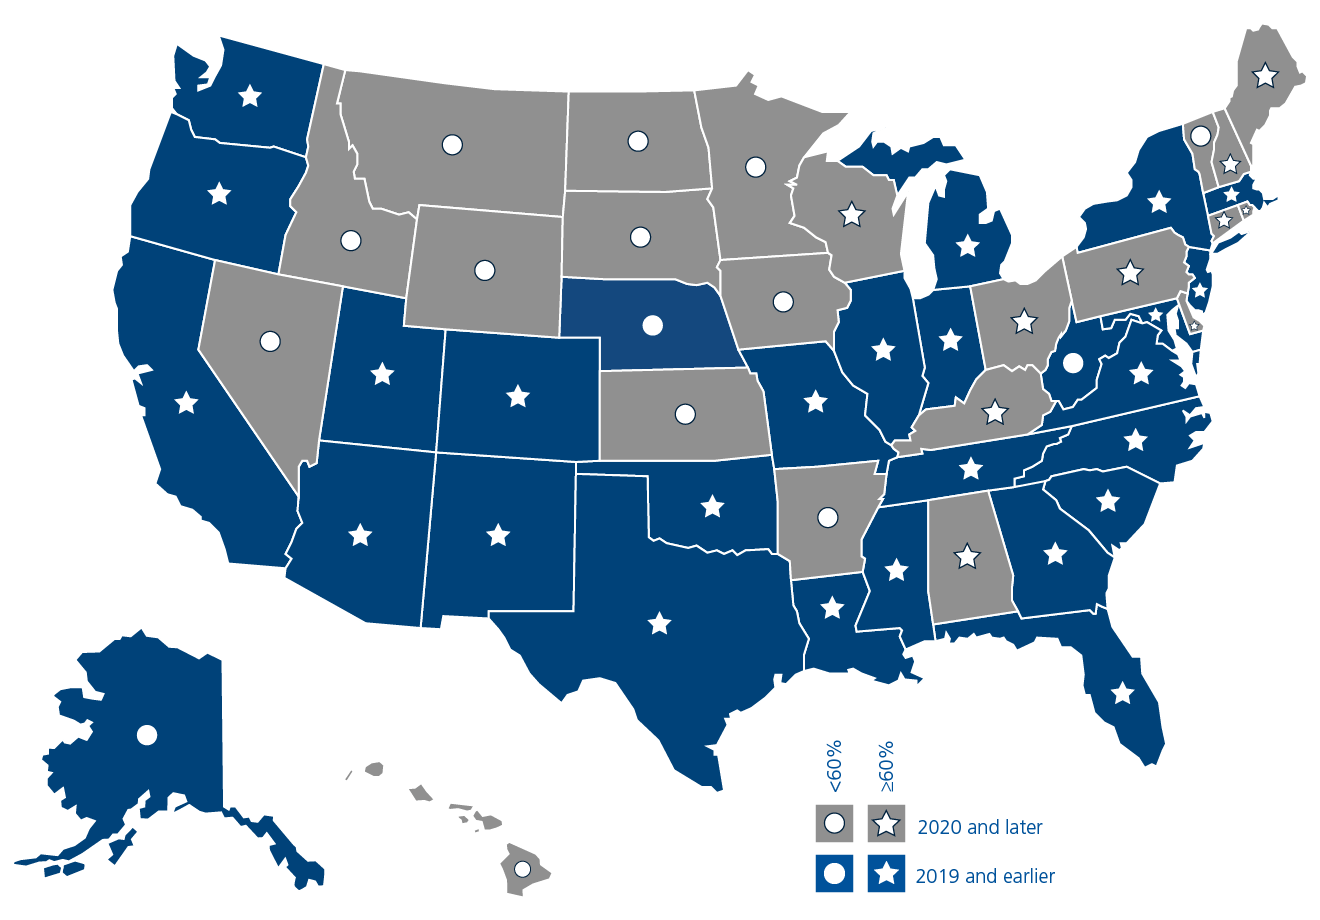 This is a map of the continental U.S., Hawaii, and Alaska that shows the association between the proportion of hospitals in a state designated as birthing-friendly and whether the state participated in a nationwide maternal health initiative. See the link below the image for a description of the image.